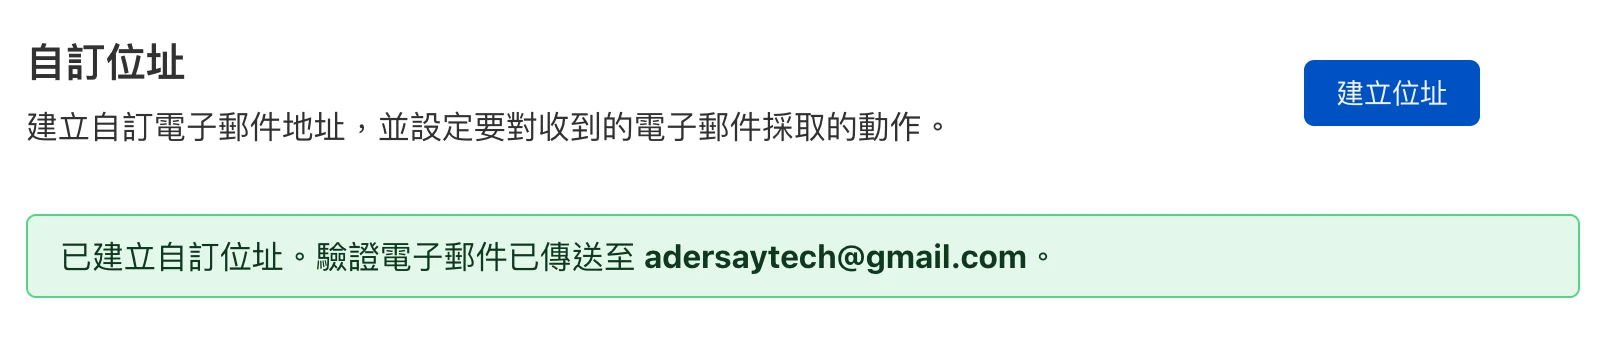 Cloudflare Email Routing 電子郵件路由，可免費自訂網域信箱！ 17